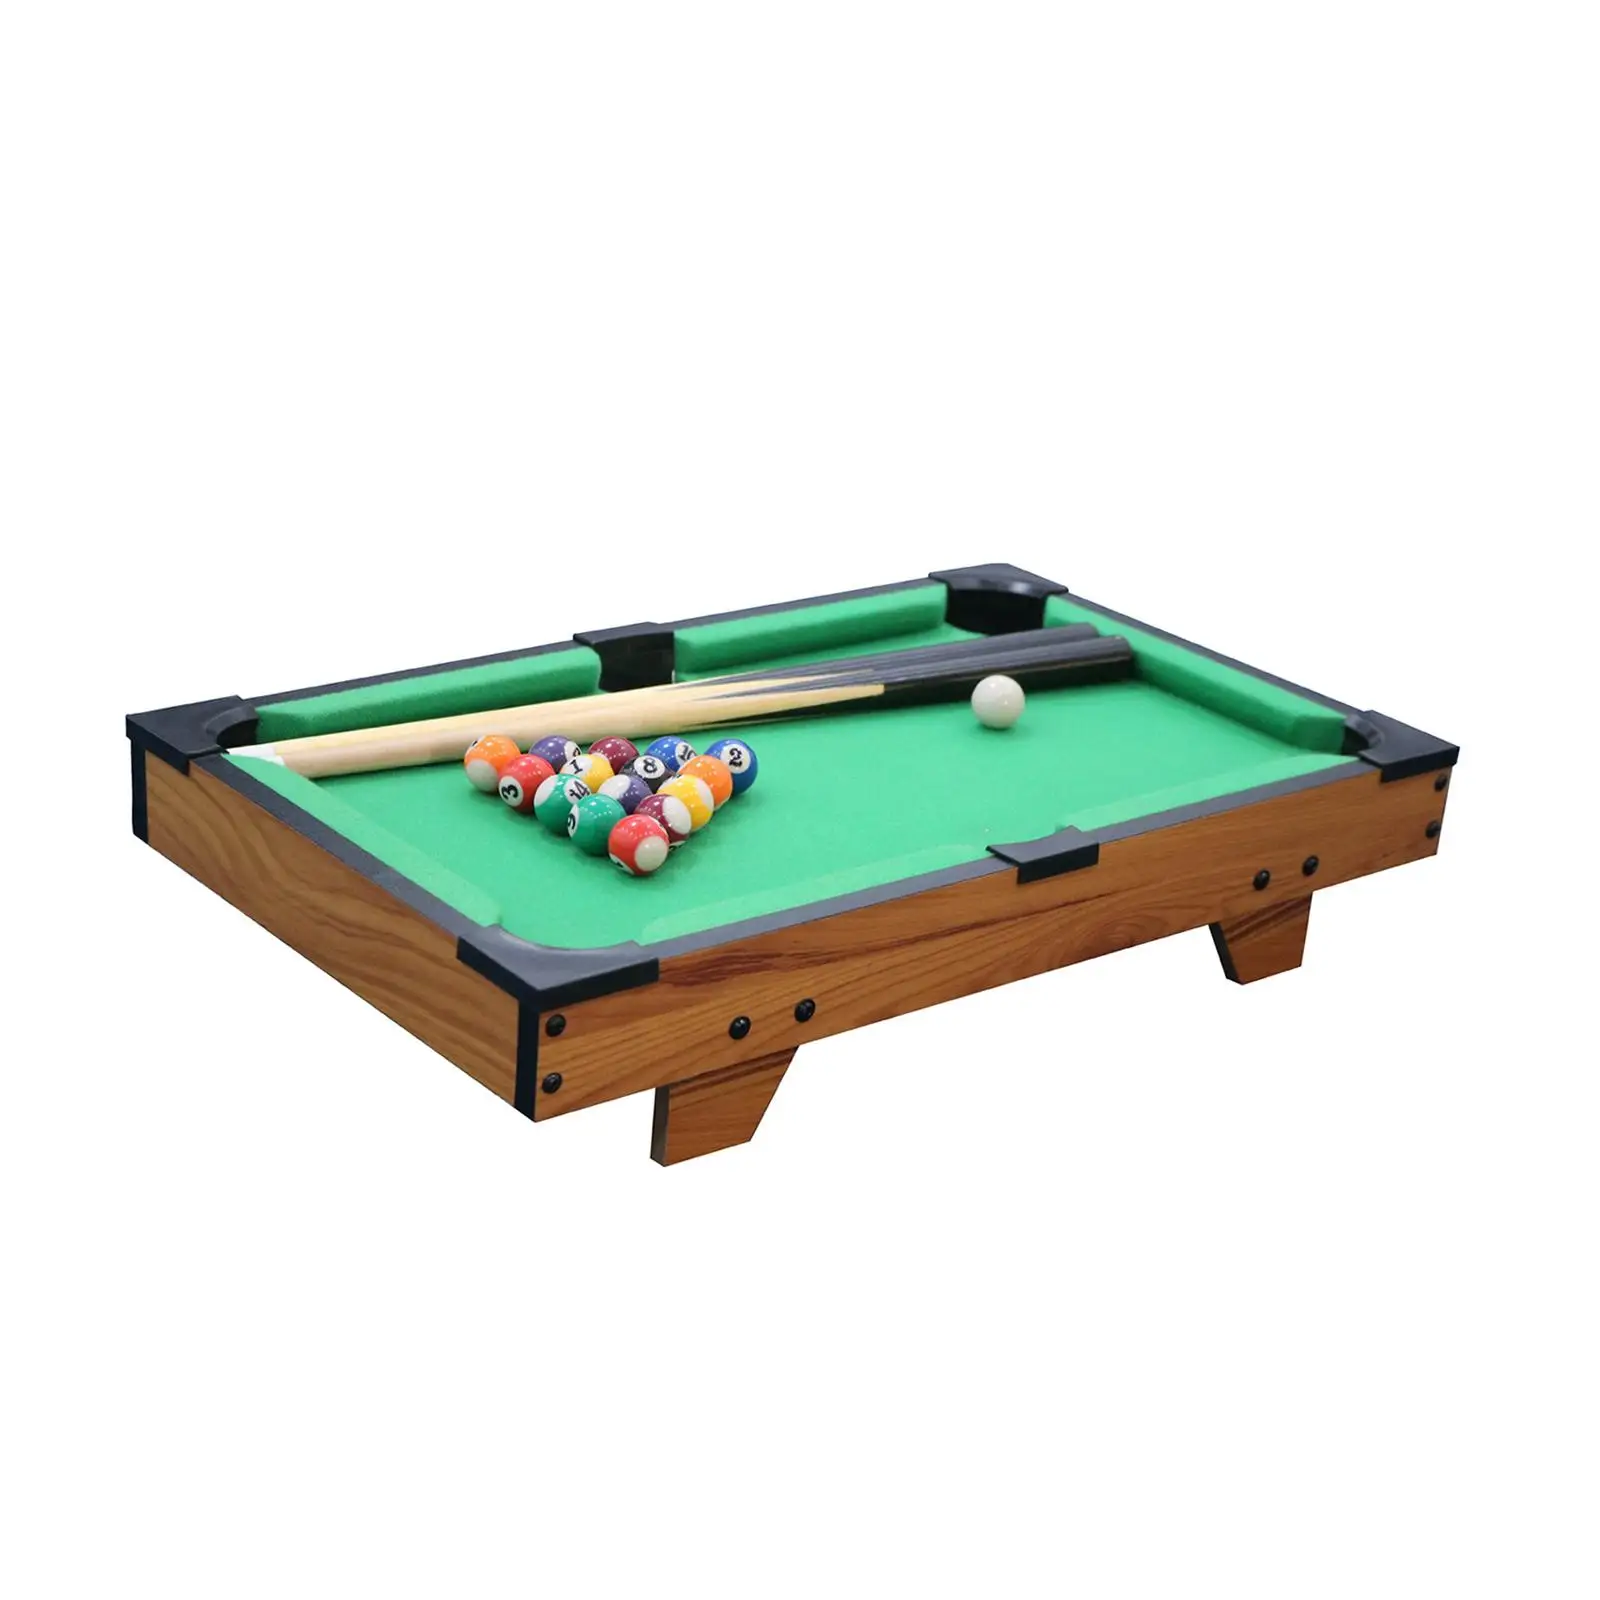 Snooker Play Miniature with Sticks Mini Table pool for Desktop Home Family Sports Kids